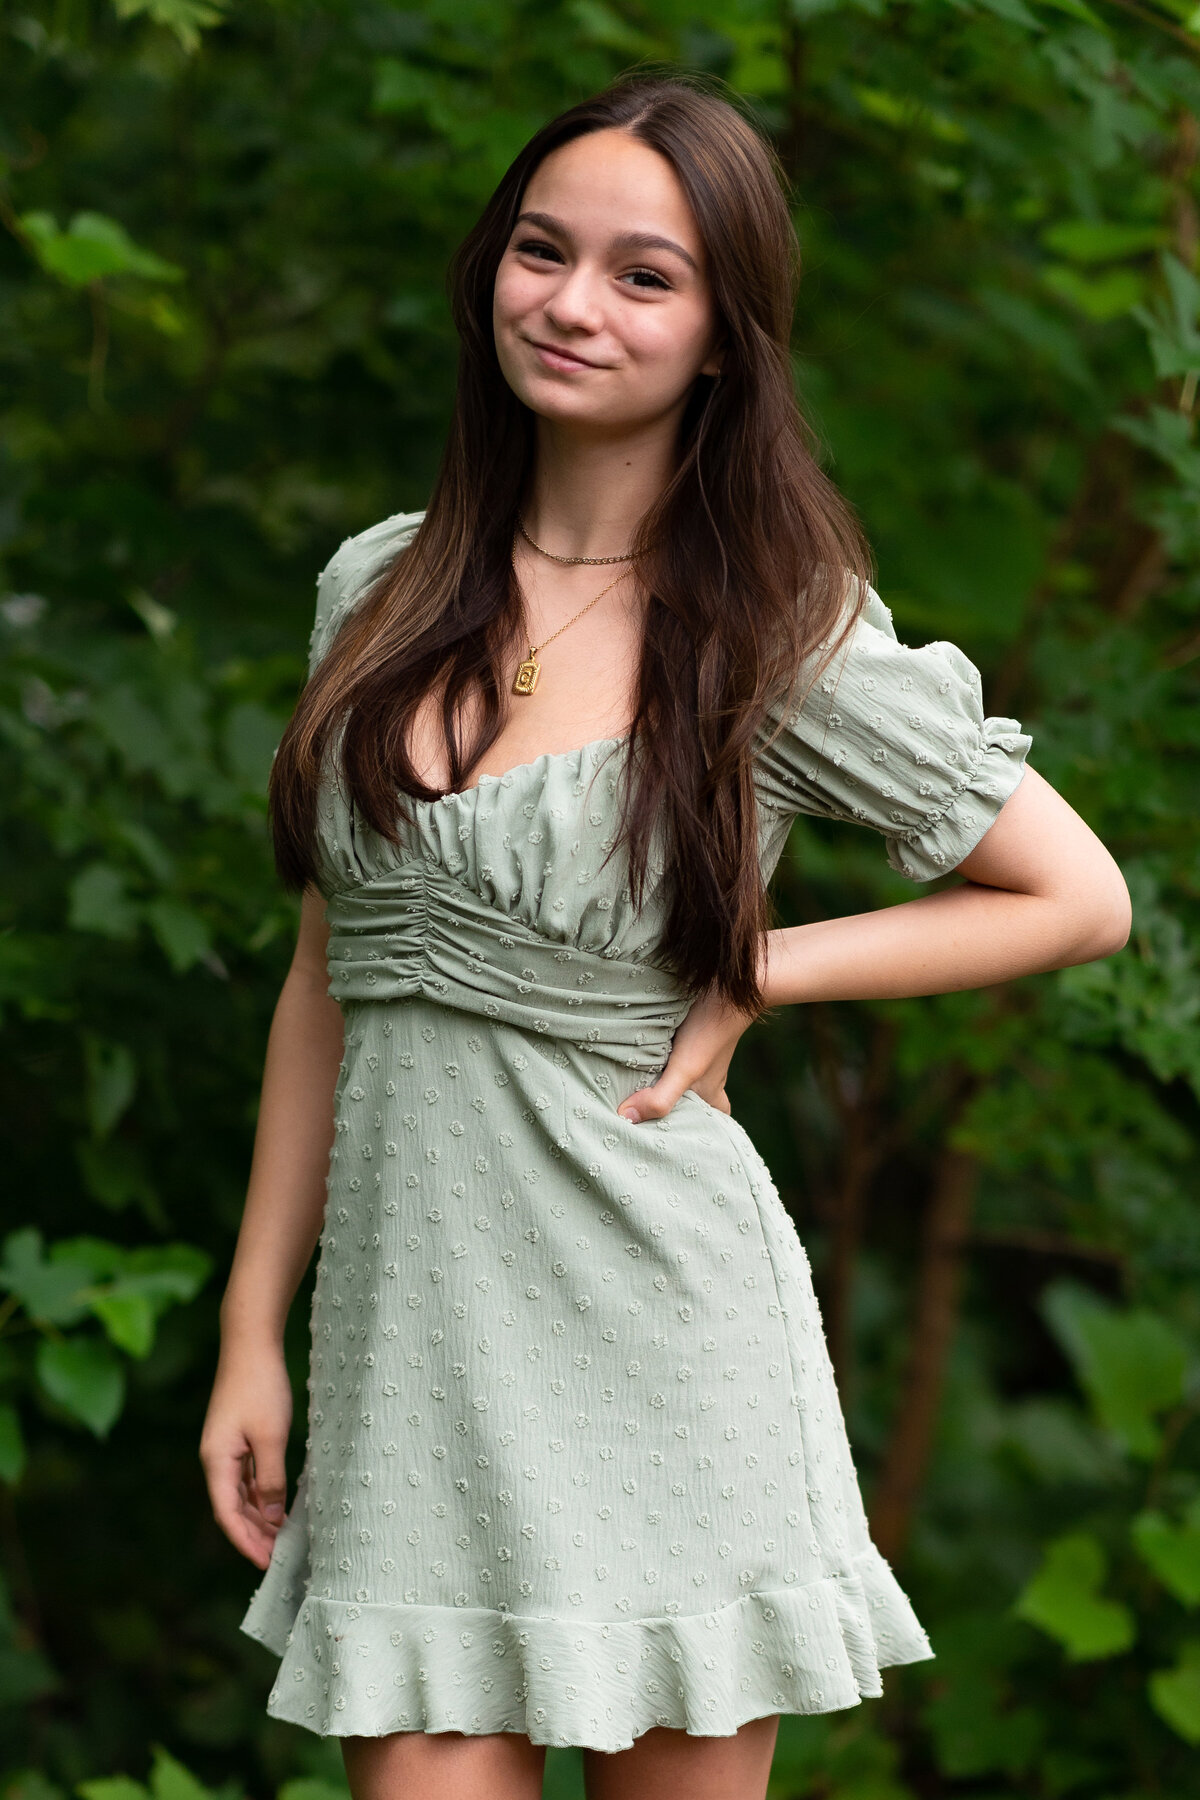 Senior girl dressed in green dress smiles with hand on hip